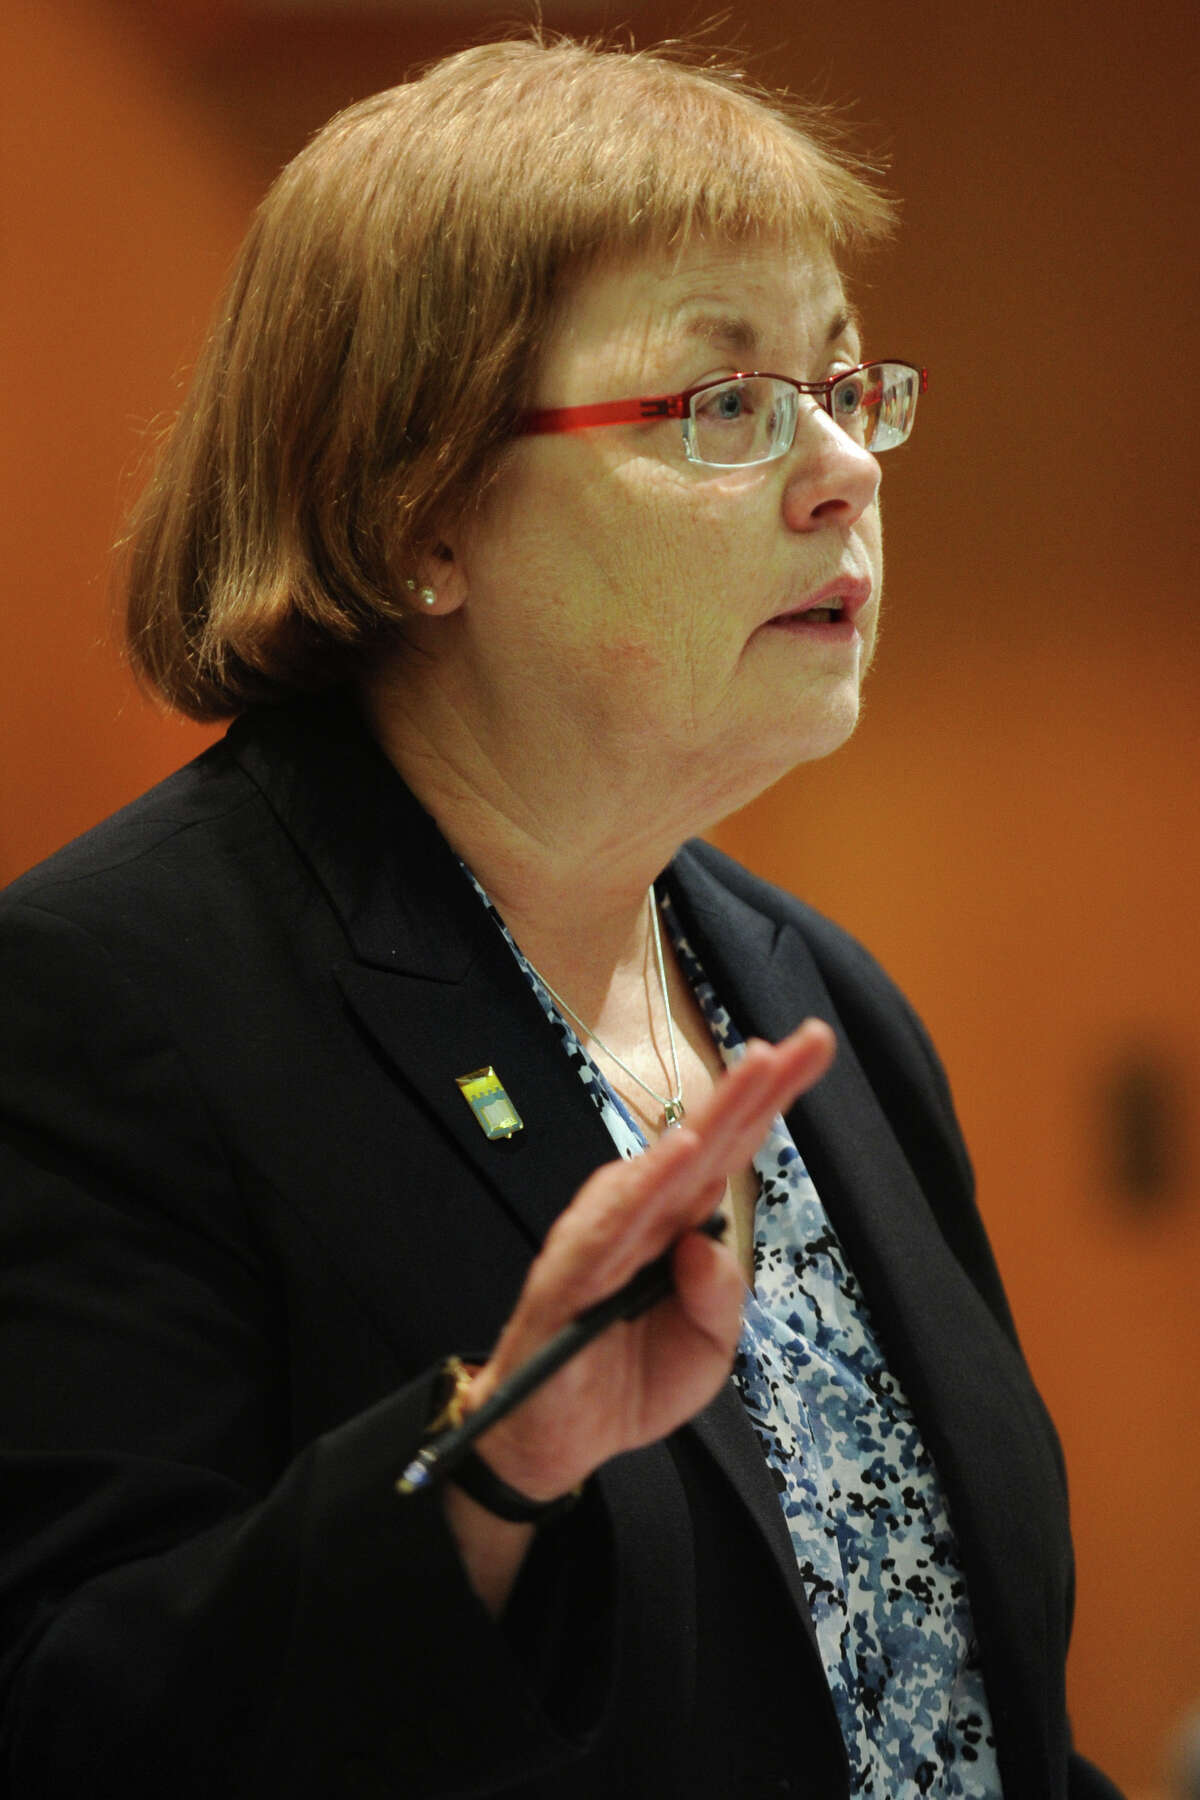 Chief Disciplinary Council Patricia King speaks in Superior Court, in Bridgeport, Conn. Sept. 11th, 2012. King spoke during a hearing for former Bridgeport Mayor Jospeh Ganim, who appeared in front of a three judge panel Tuesday in his effort to regain his law license.